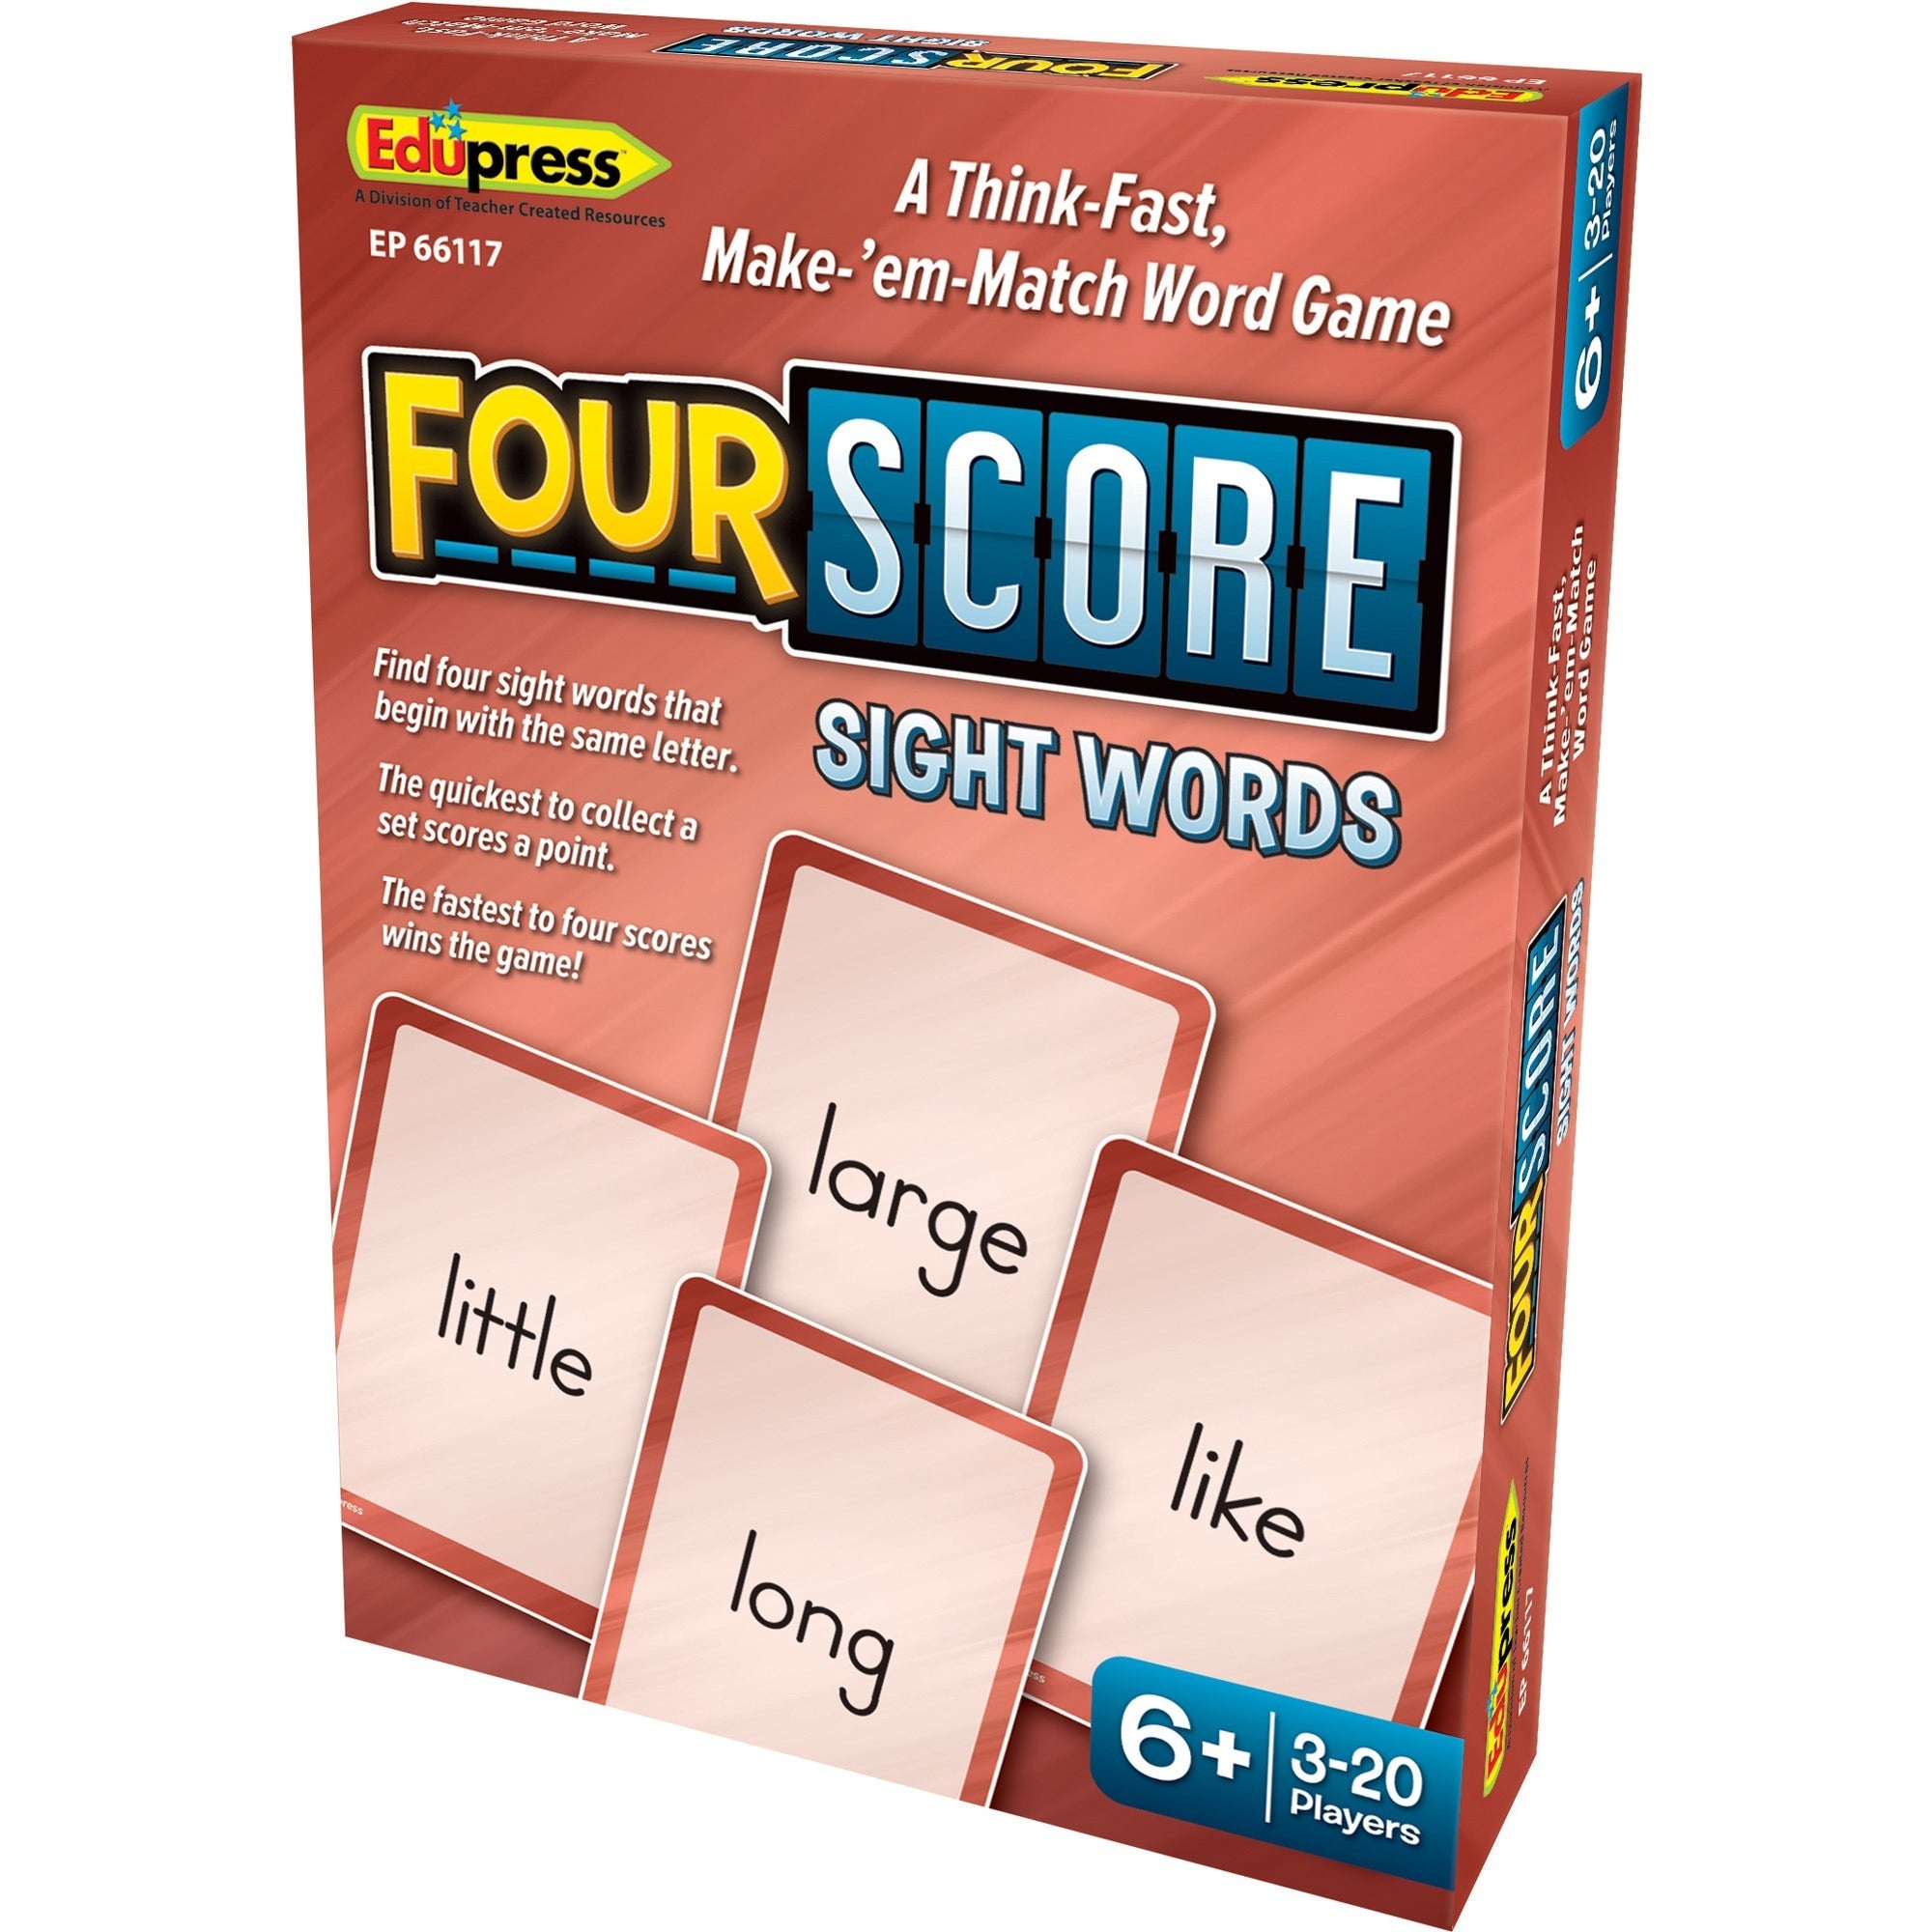 teacher-created-resources-four-score-sight-words-game-matching-3-to-20-players-1-each_tcrep66117 - 1